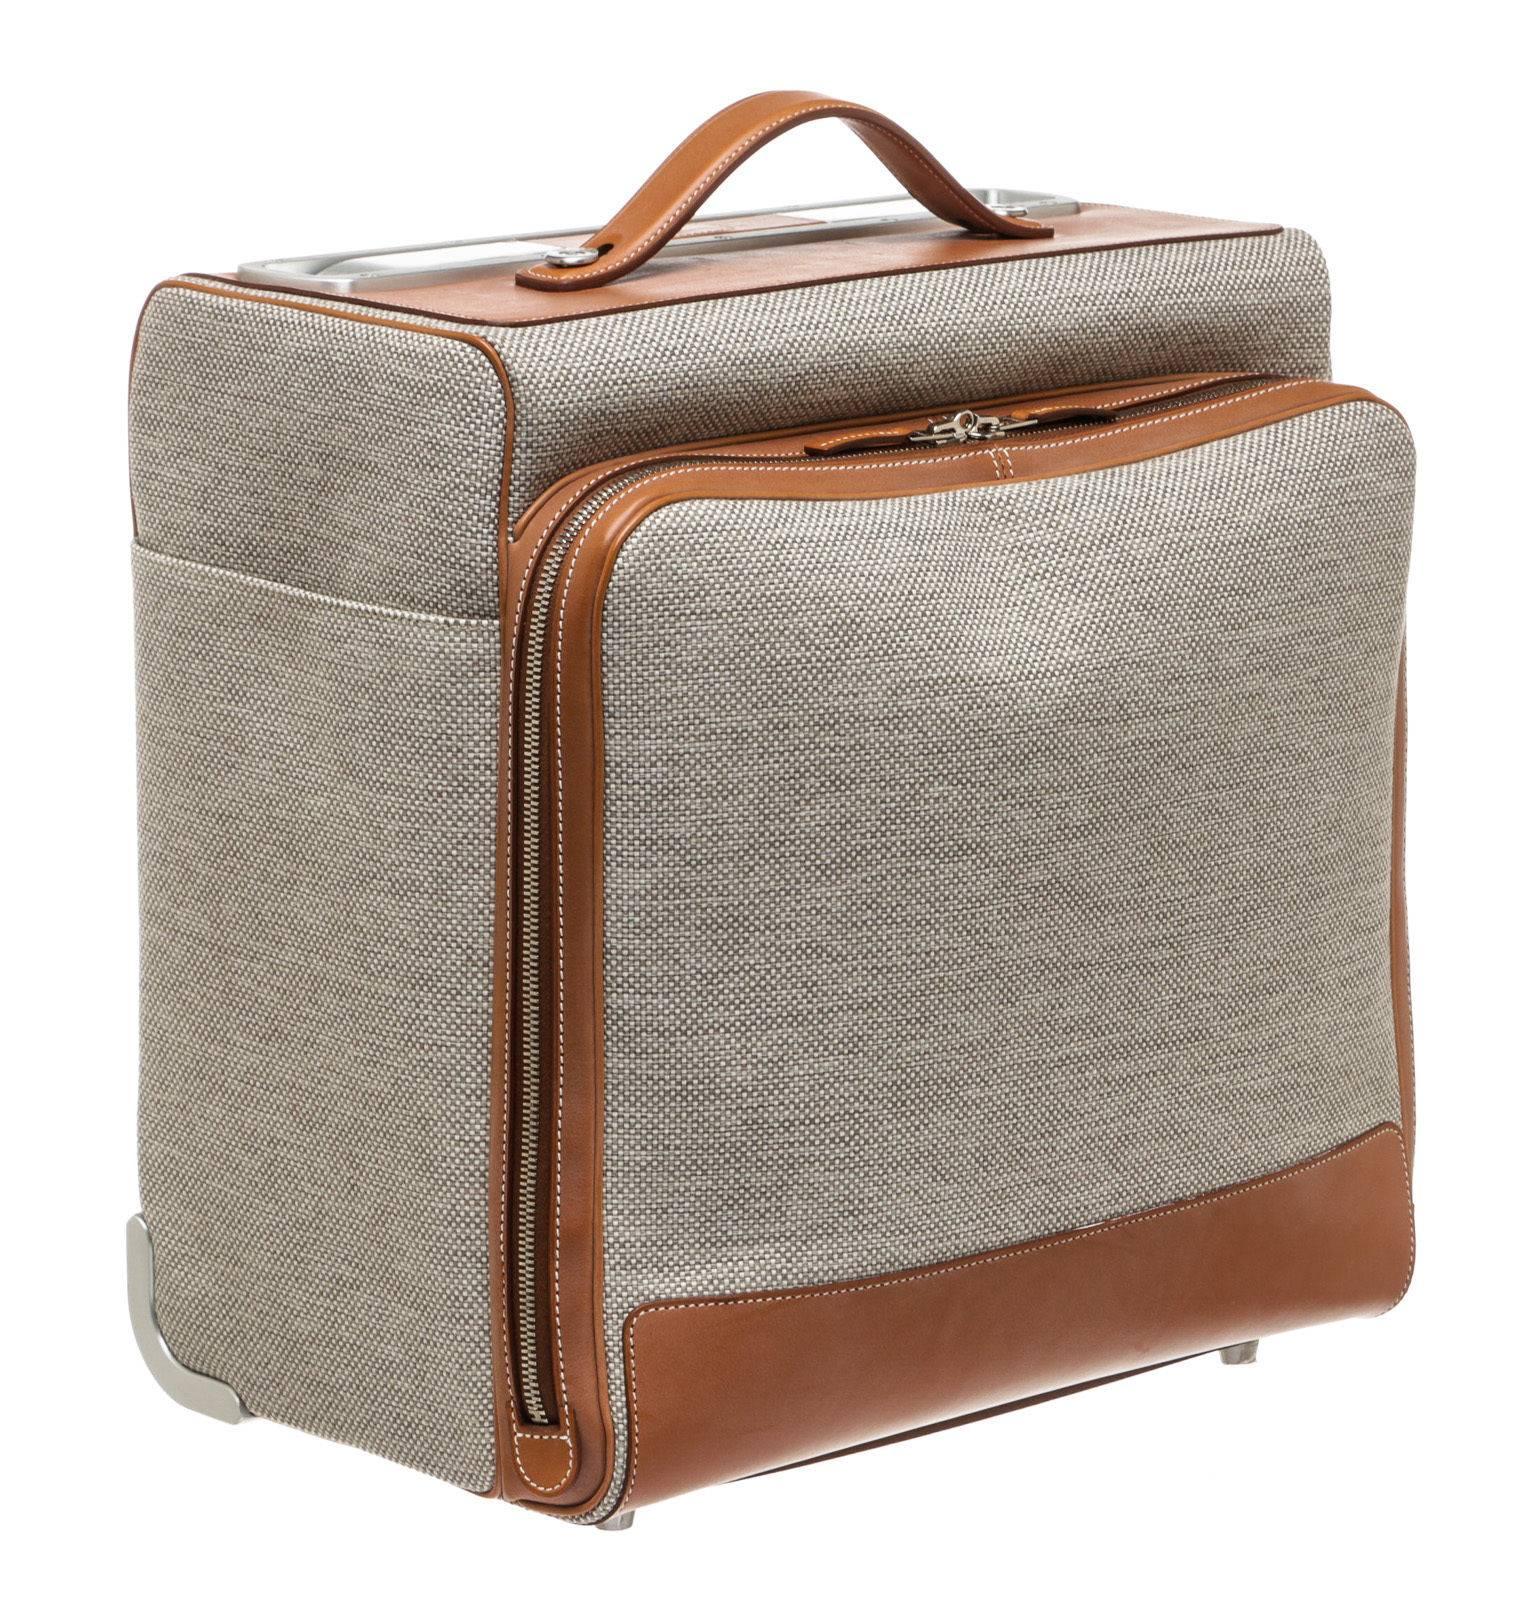 Designer: Hermes
Type: Luggage
Condition: New
Color: 
Beige/Tan
Material: 
Fabric/Leather
Dimensions: 
Description: 
Silver-tone hardware
Sku: 205821